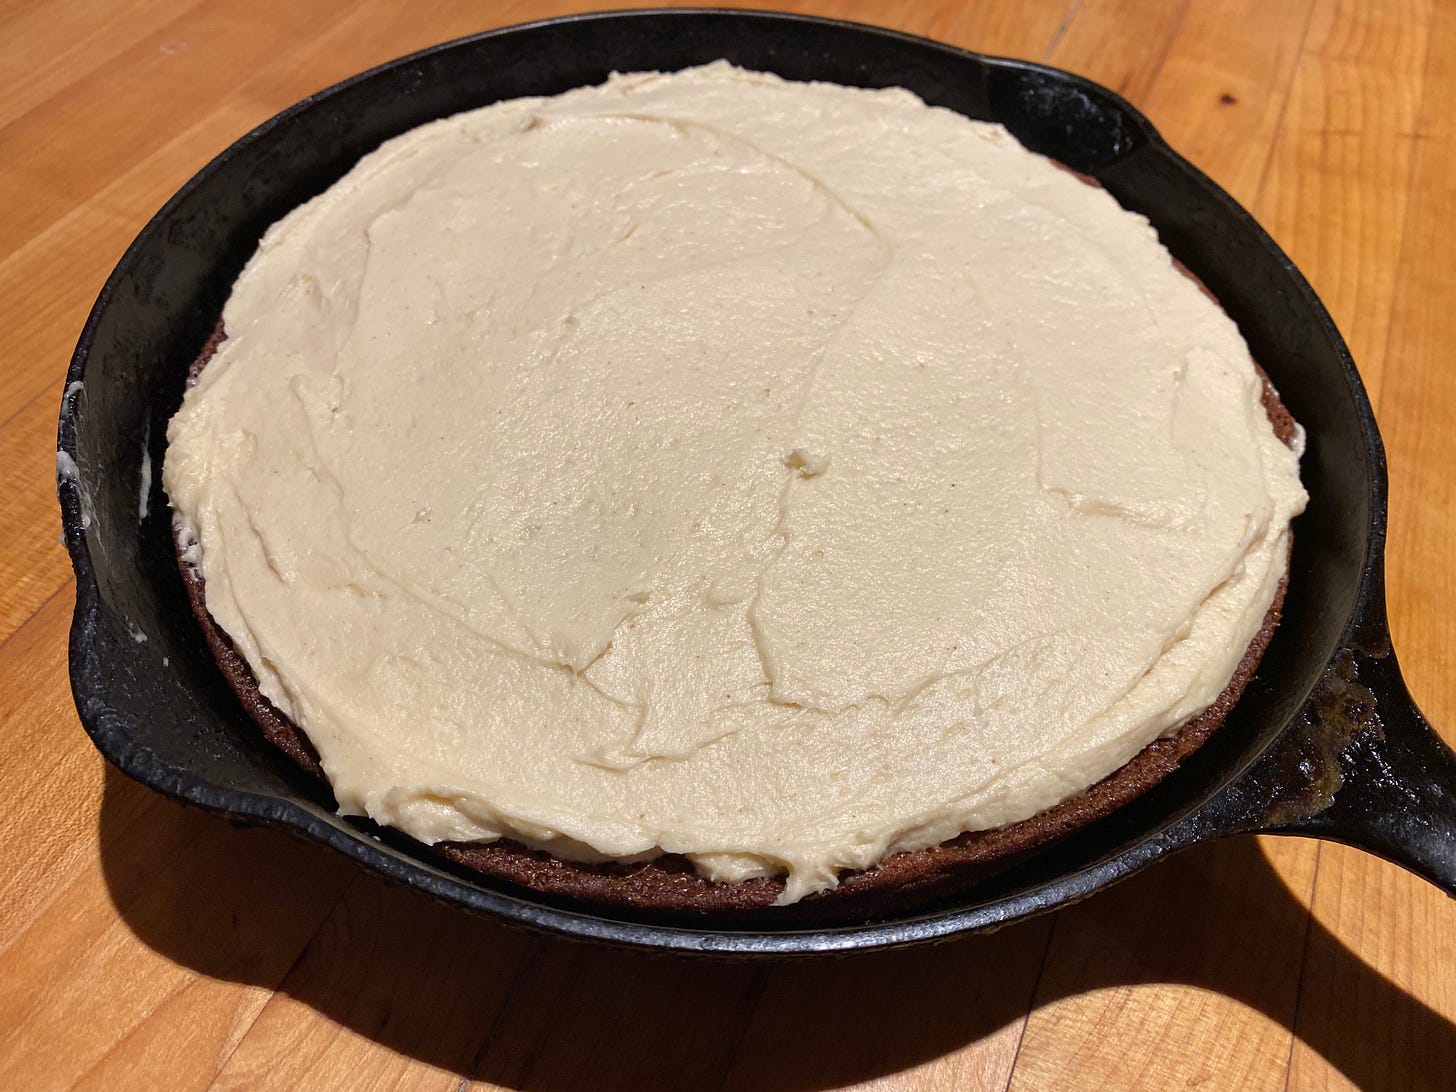 A round, white-frosted cake in a cast iron skillet sits on a wooden counter.